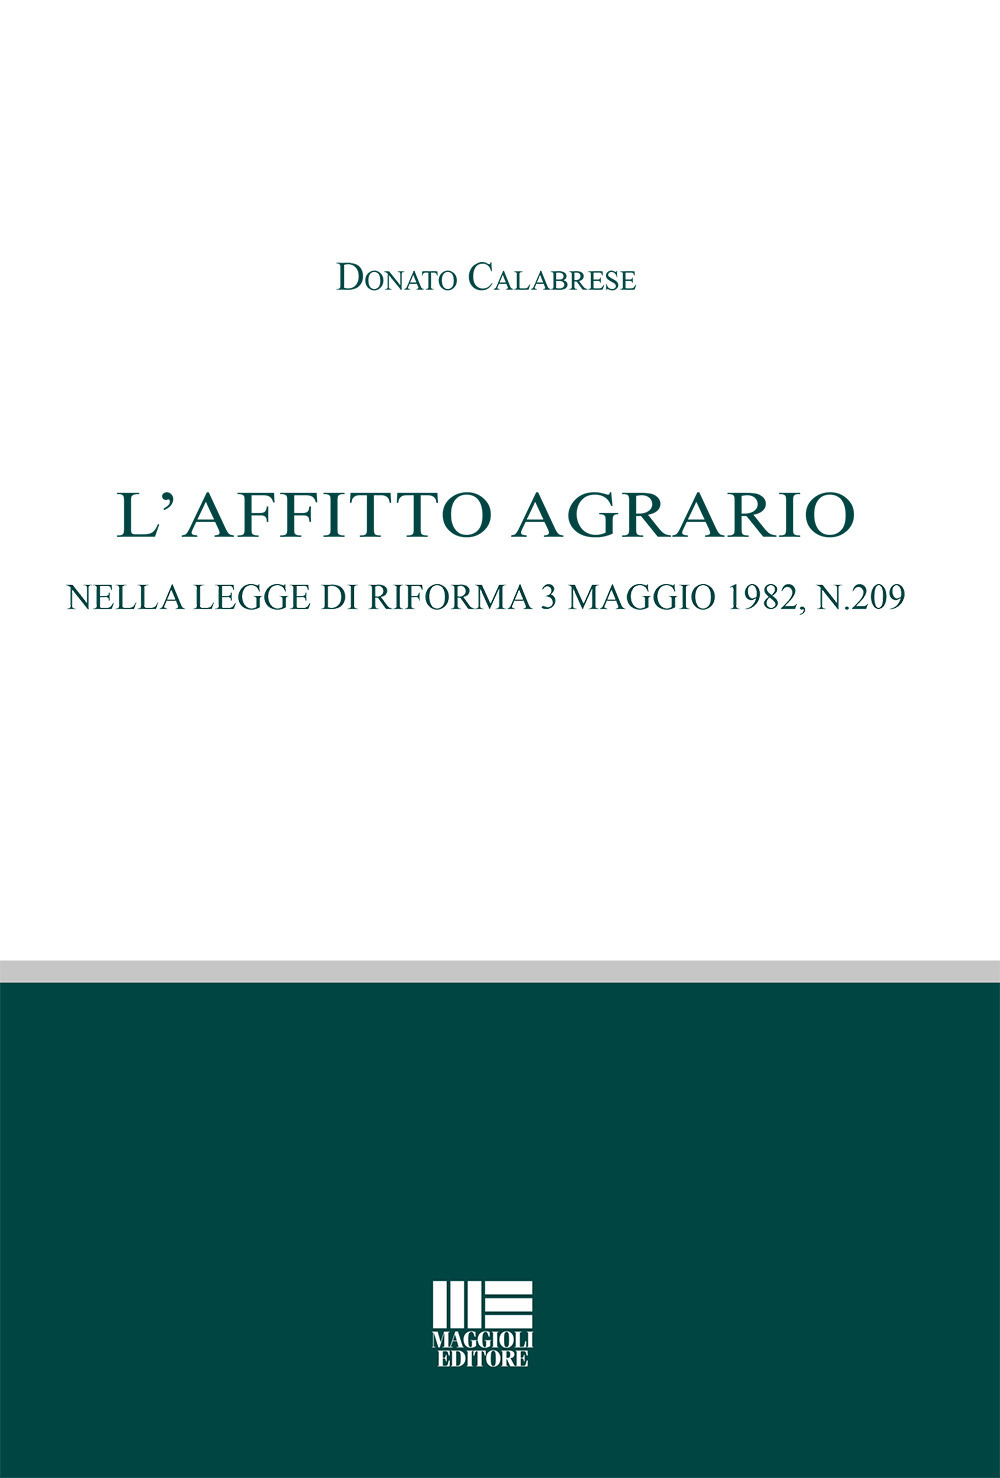 Image of L' affitto agrario